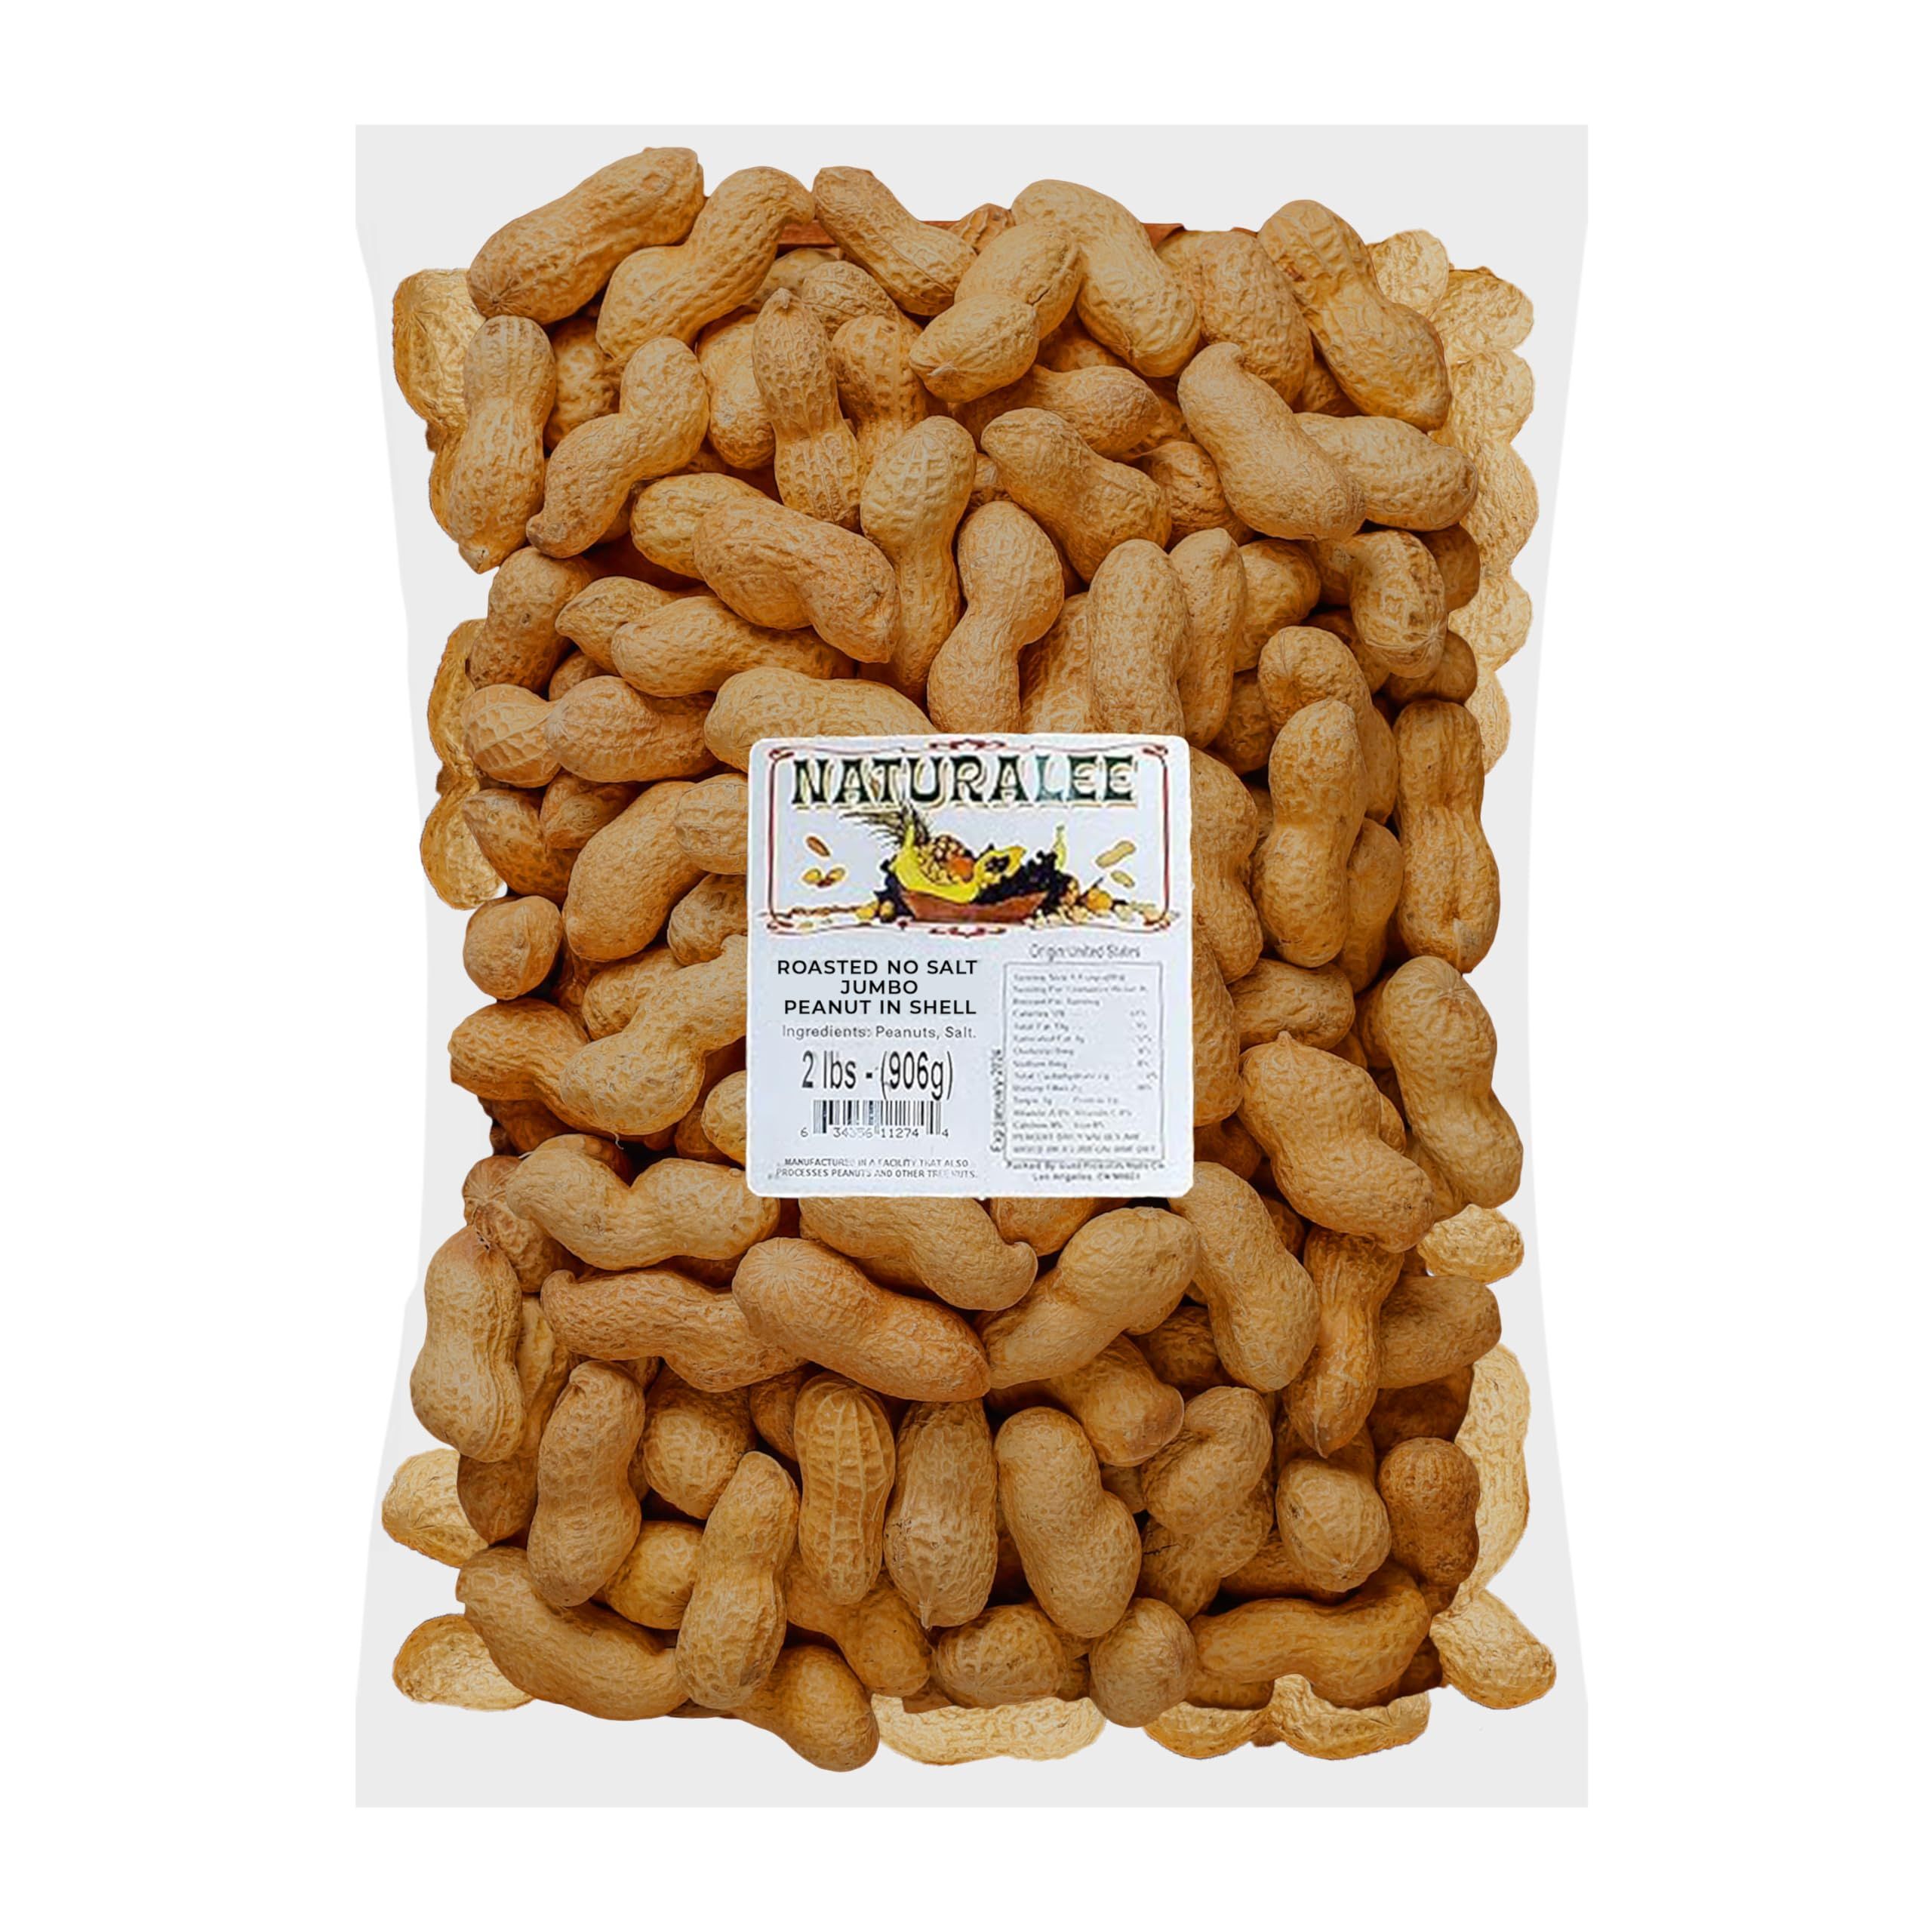 Naturalee Peanuts, In Shell 2 lbs - Roasted, No Salt - Natural Healthy Snack | Amazon (US)